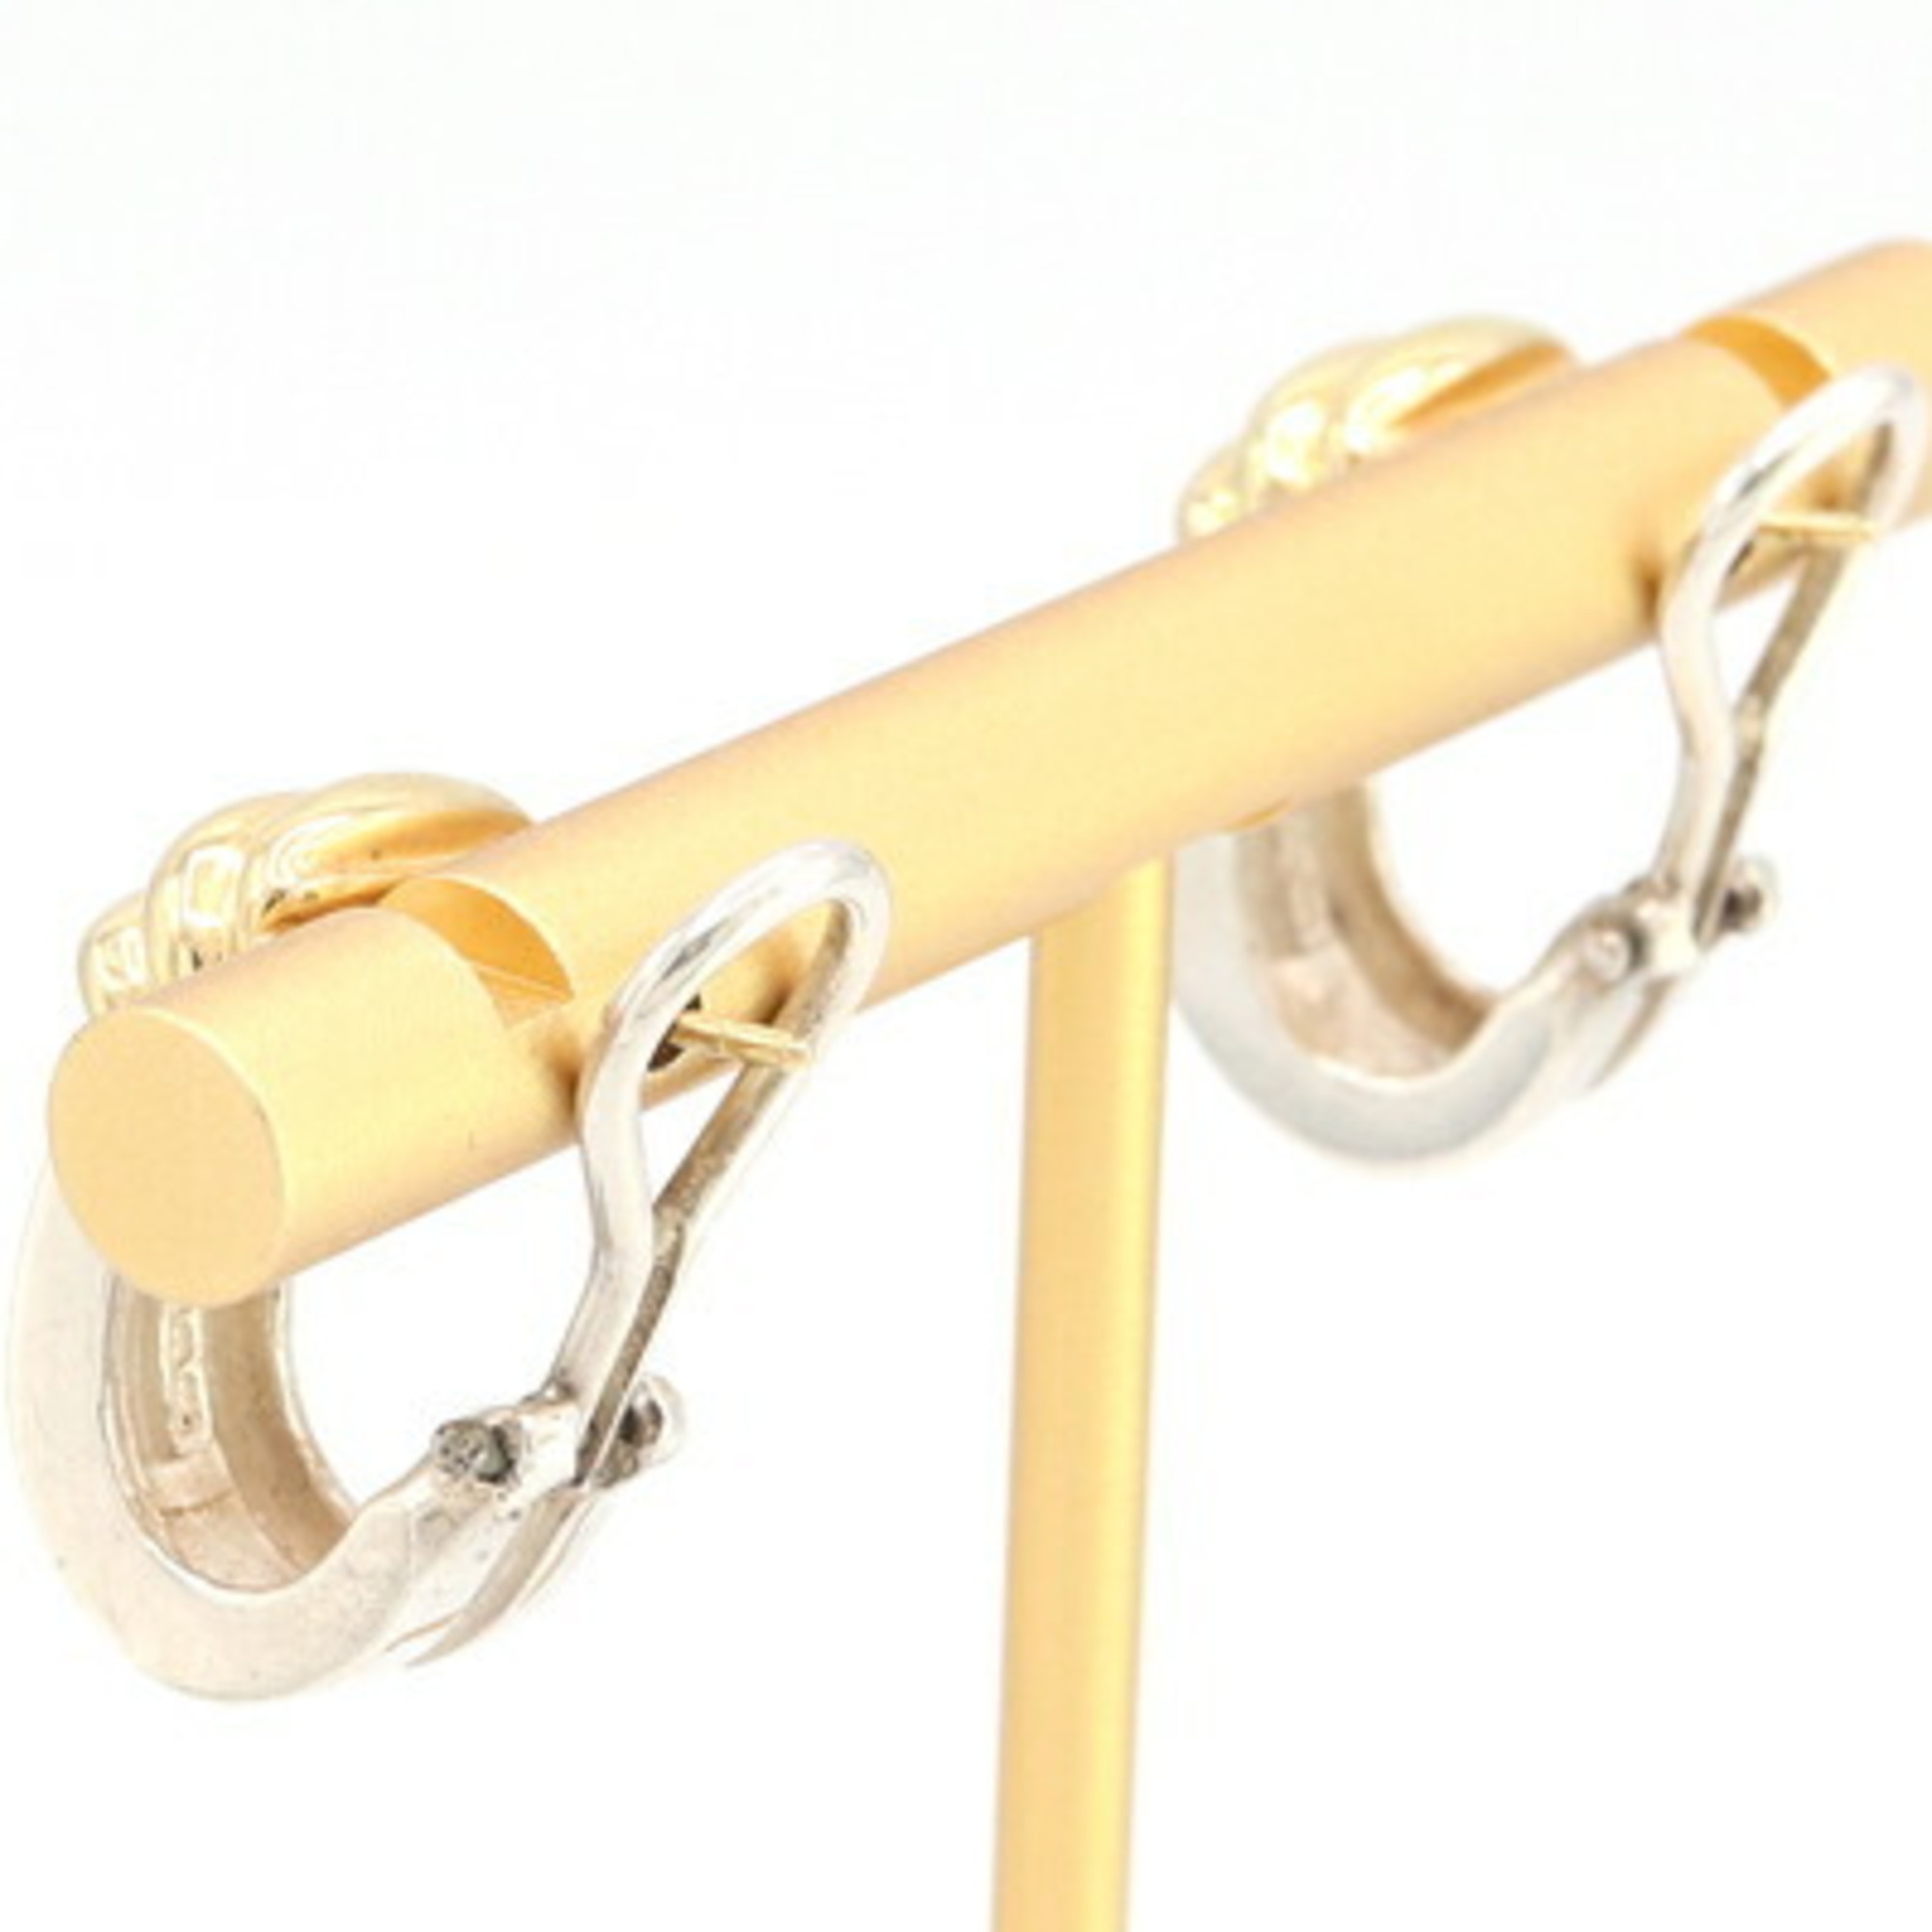 Tiffany Earrings Grooved SV Sterling Silver 925 YG 18K Yellow Gold Ladies Ear Combination TIFFANY&CO